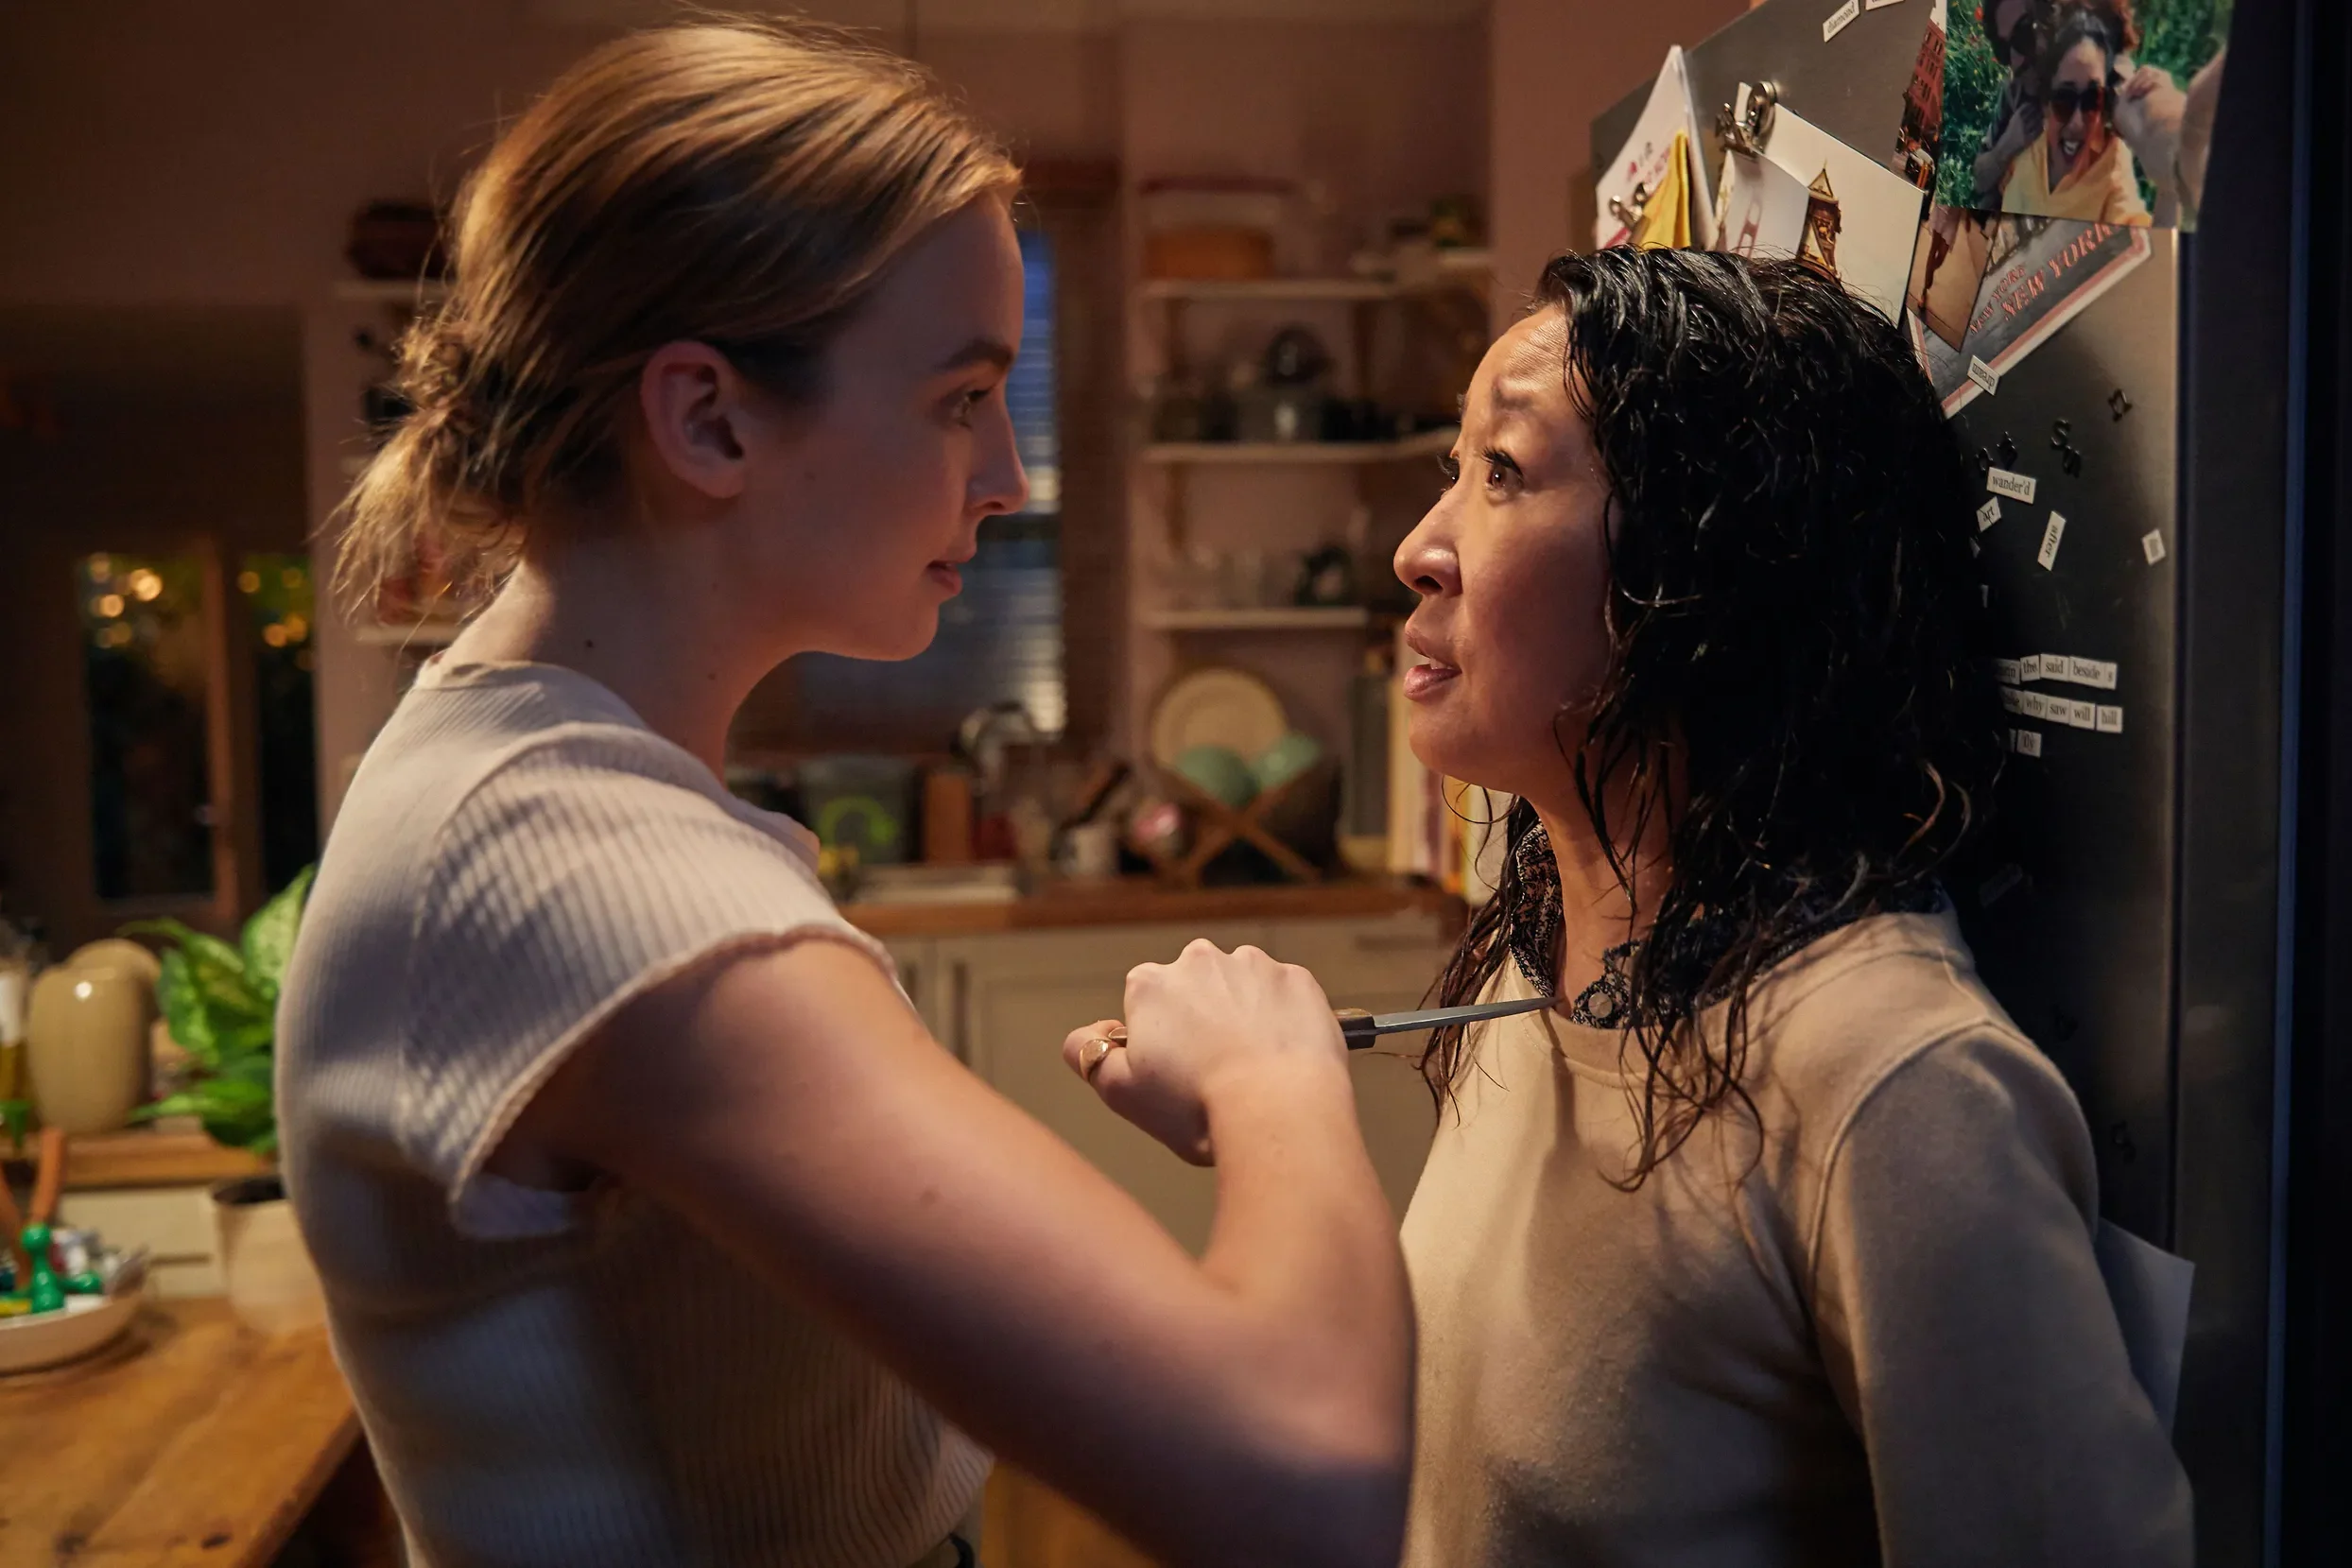 A middle-aged Asian woman stands with her back against her fridge in her homey kitchen, caught unawares by a young white woman, dressed in a white top with her hair in a bun, holding a knife to the Asian woman's neck. 